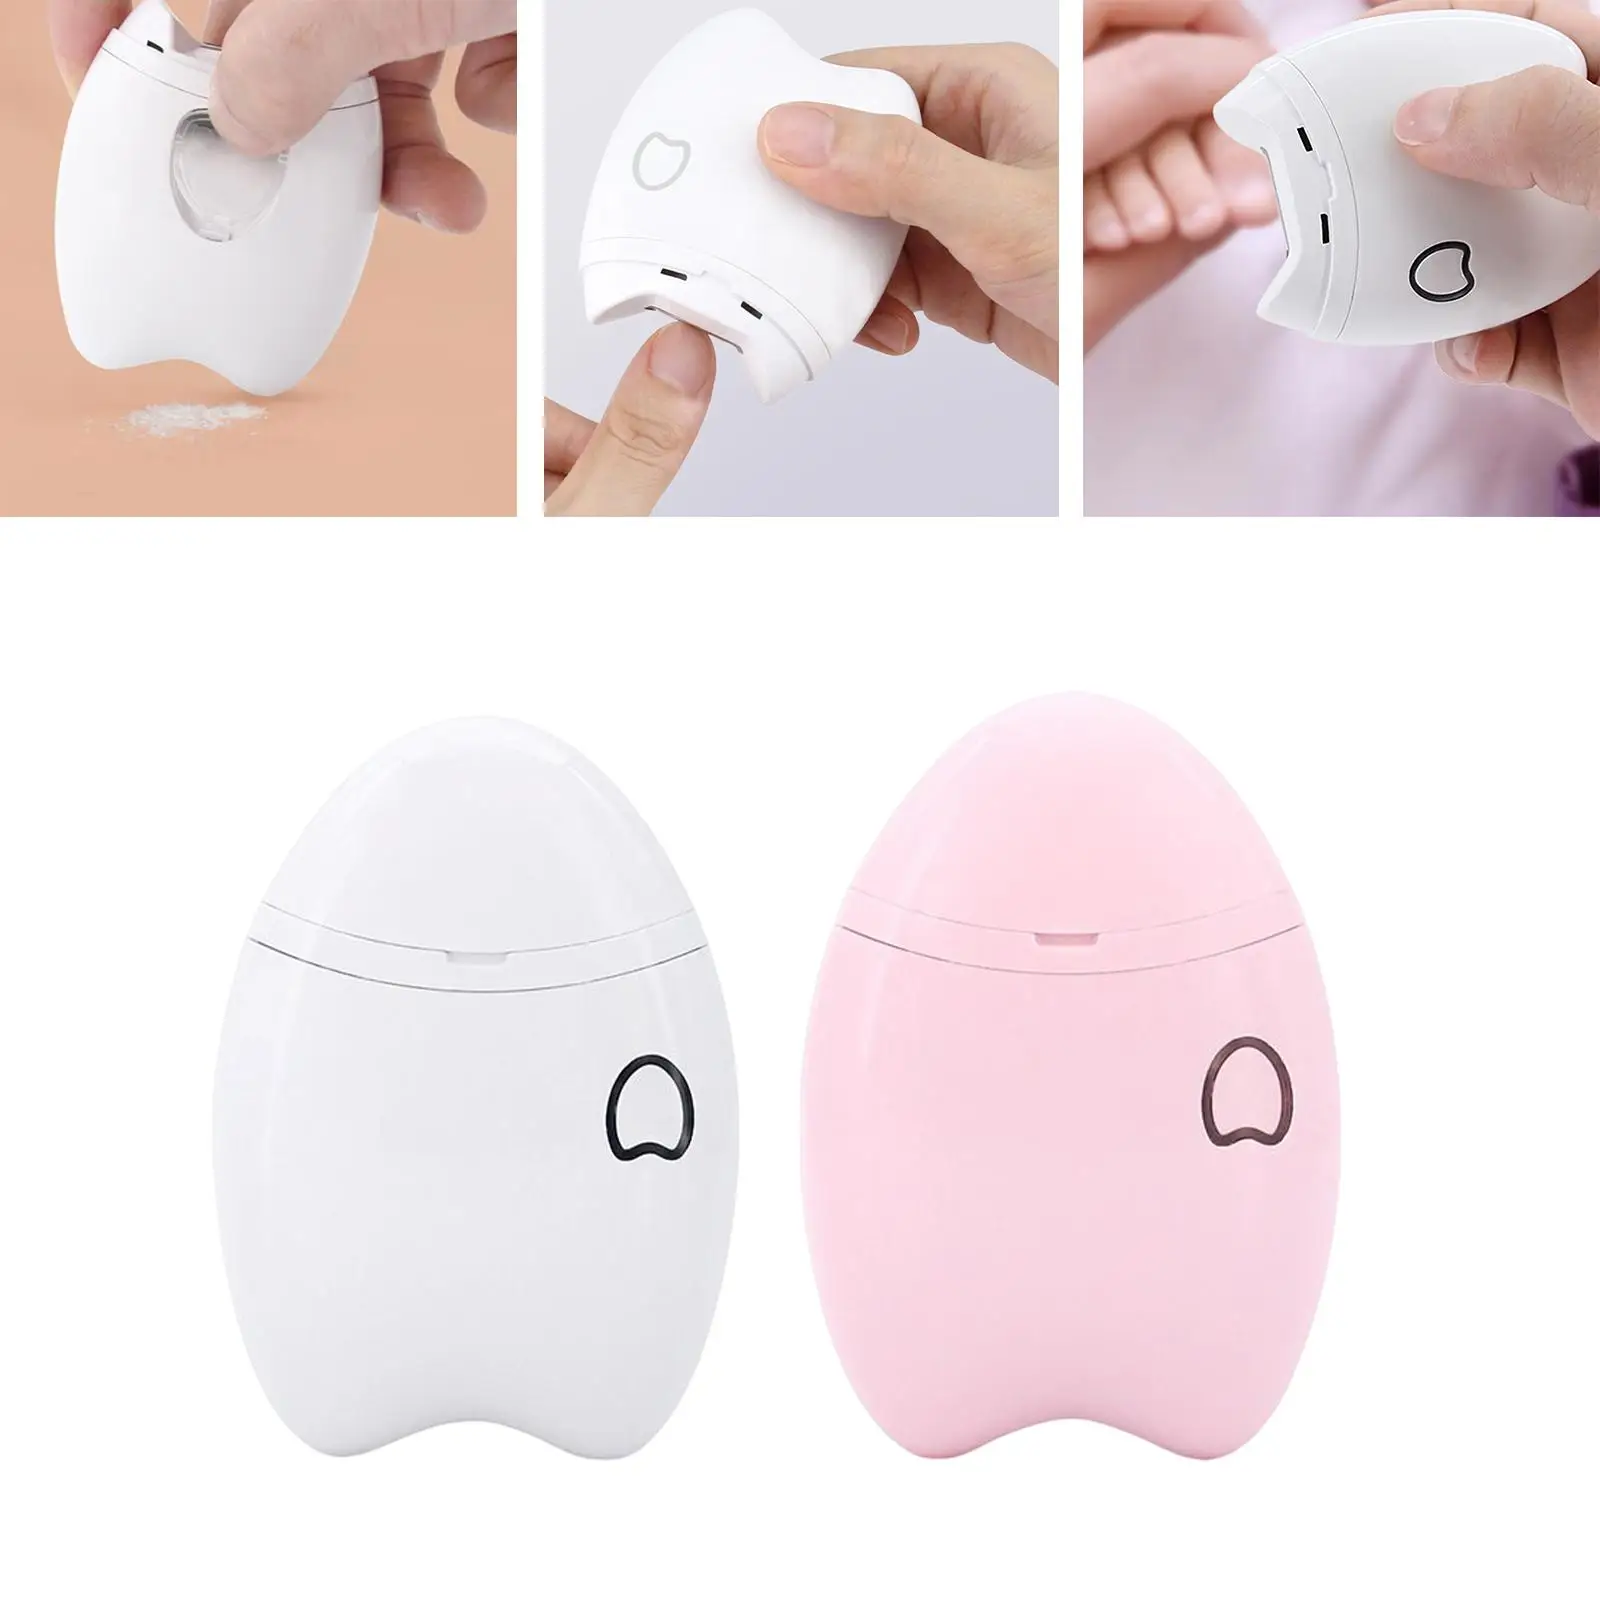 Automatic Electric Baby Nail Clipper Manicure Pedicure Fingernail Trimmer Nail Scissors Nail Cutter for Baby Children Newborn